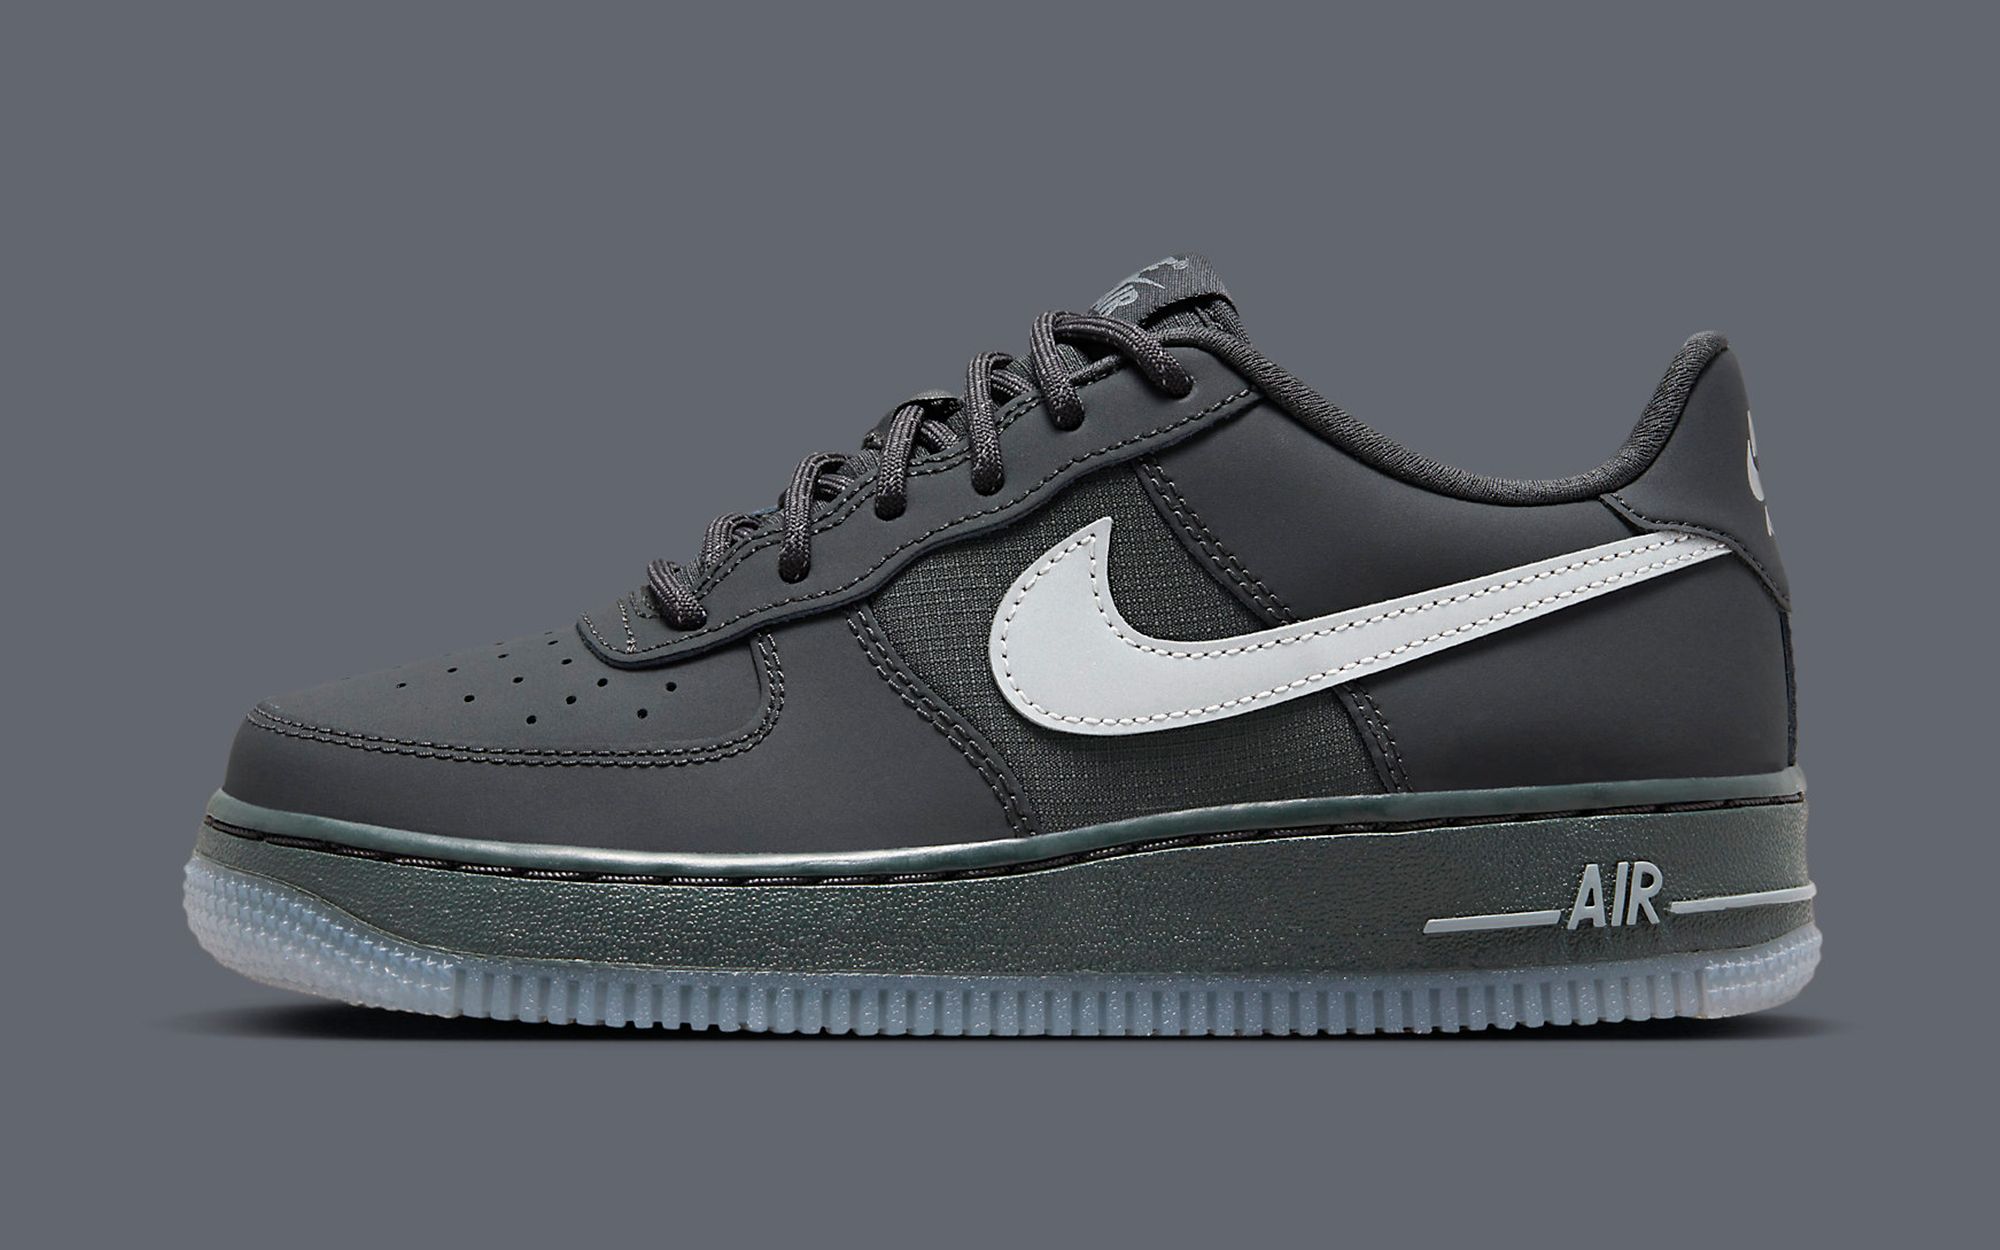 Perforeren Snor kogel Nike Adds Reflective Swooshes to this Matte Black Air Force 1 Low | House  of Heat°